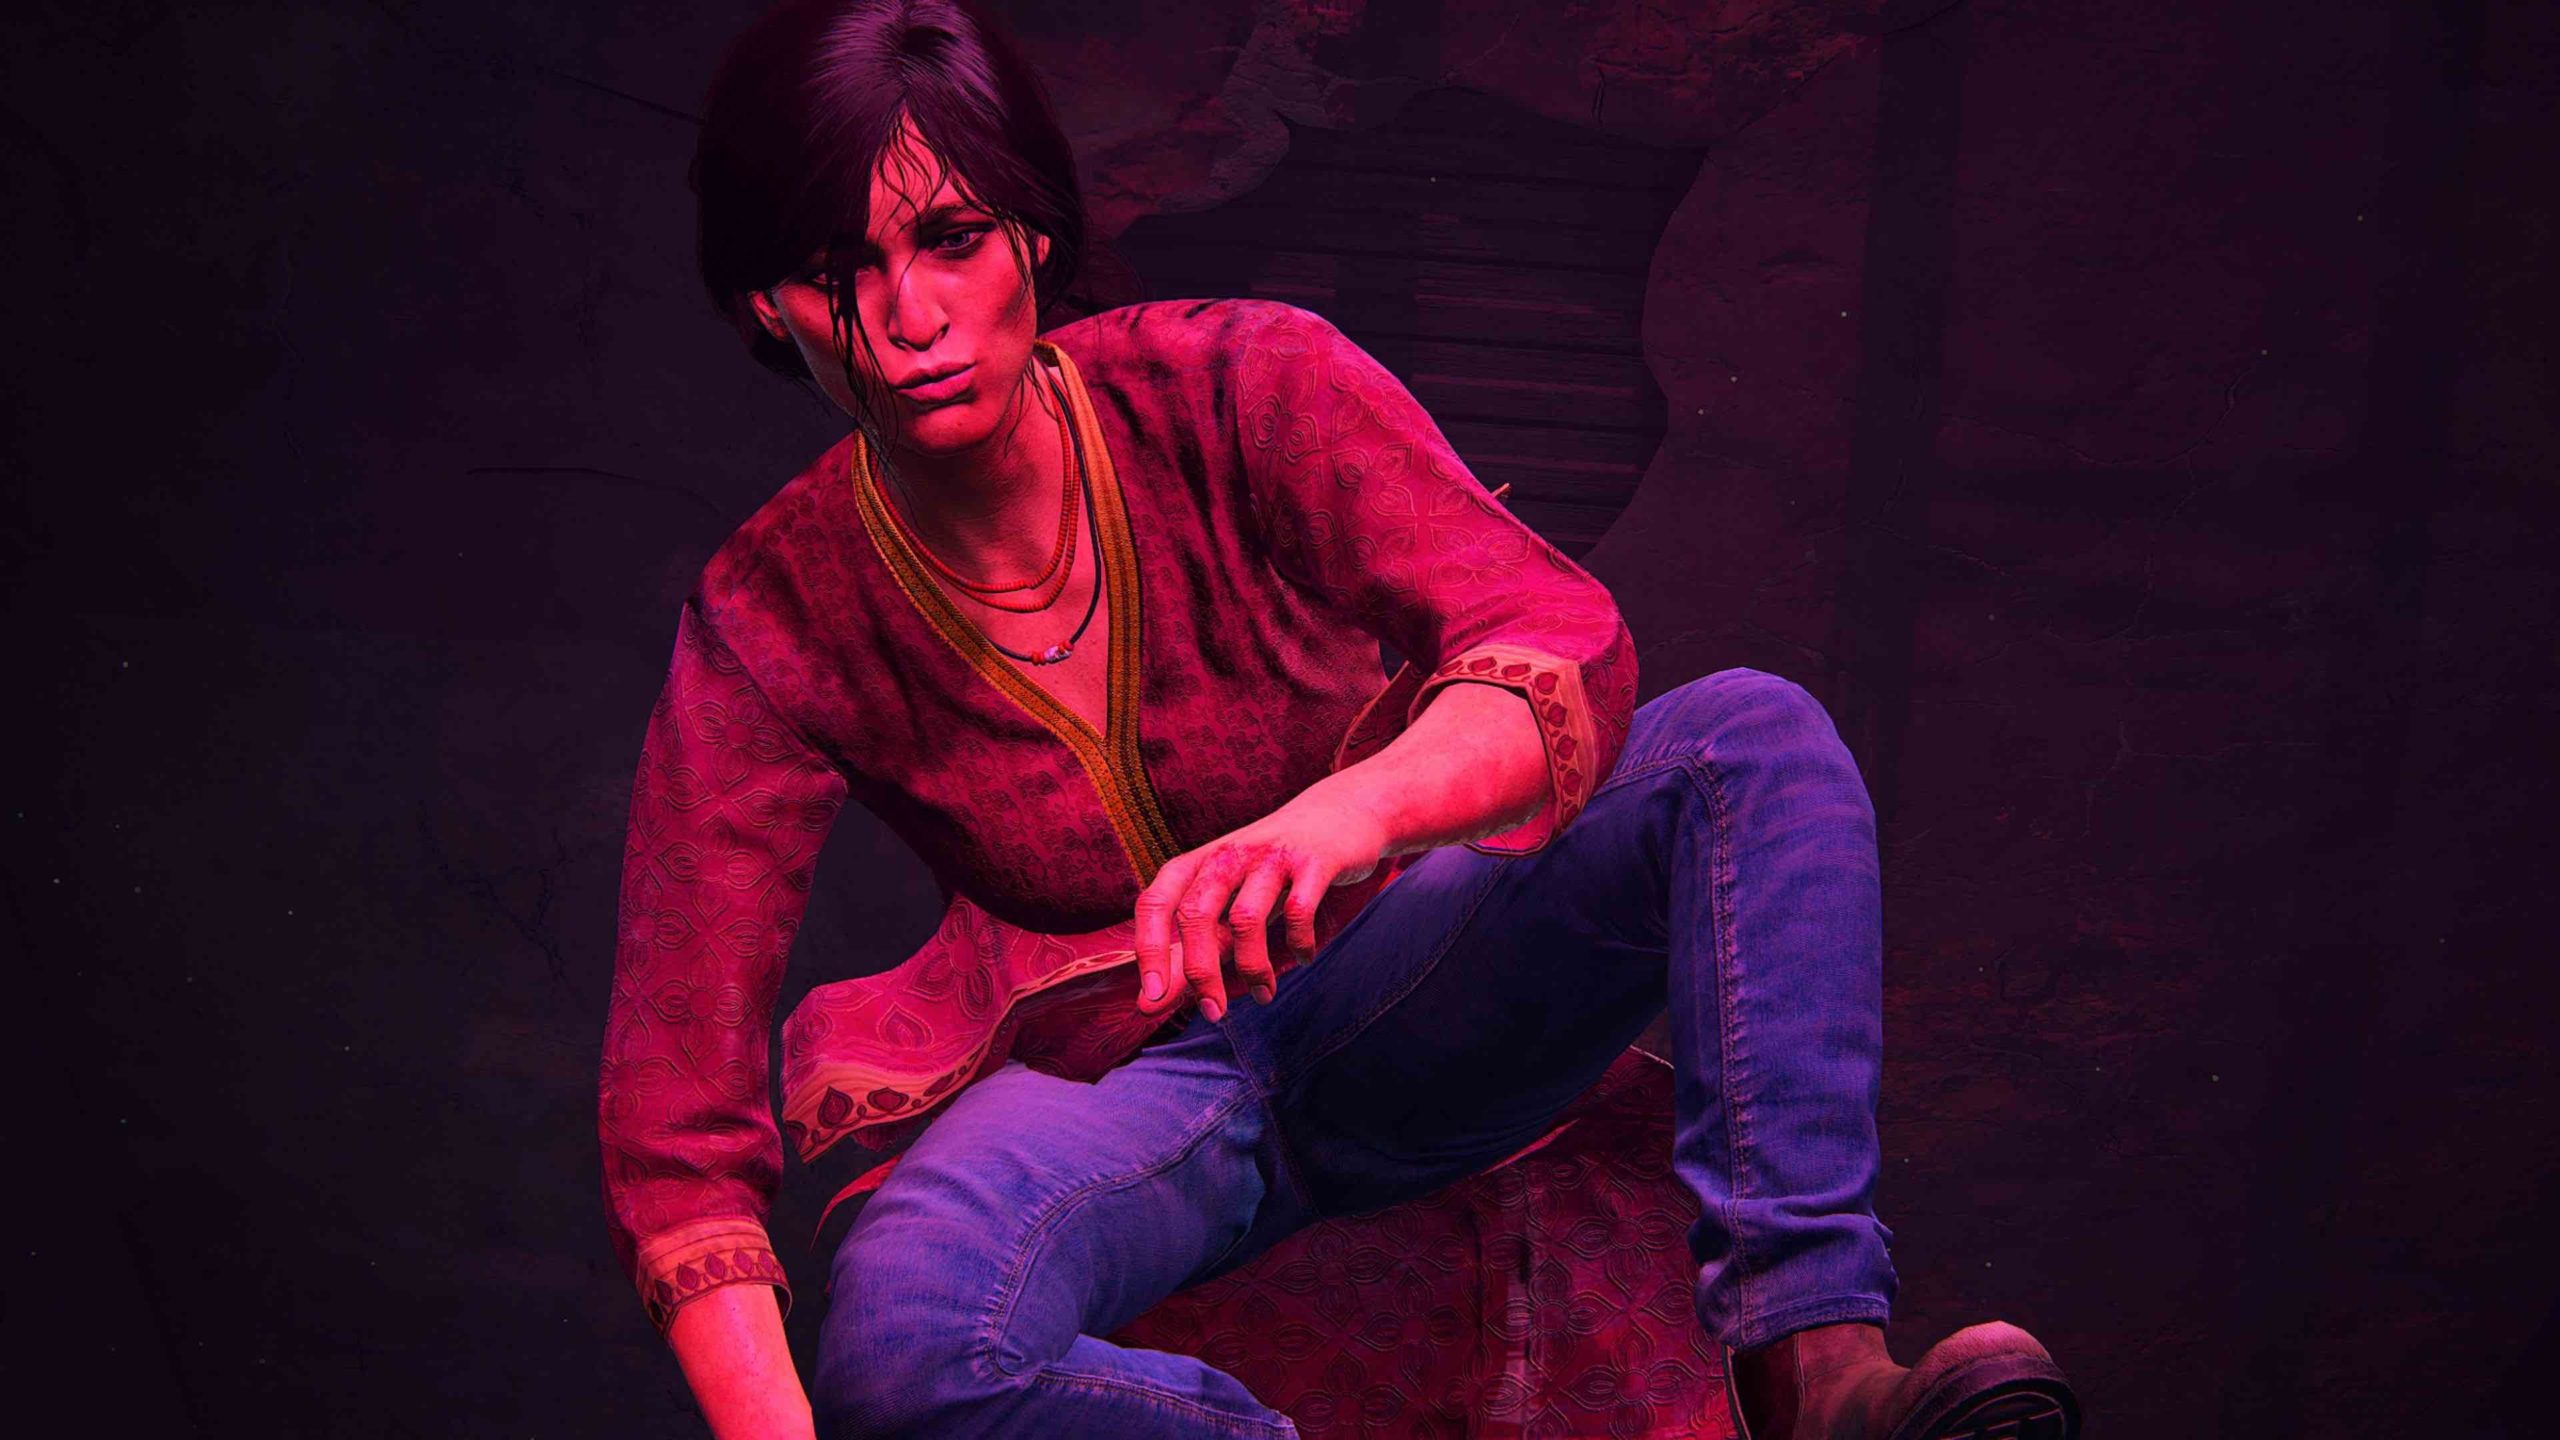 Good news: The best feature in Lost Legacy — the option to have protagonist Chloe Frazer make a duck face in the photo mode — is included in Legacy of Thieves. (Screenshot: Sony / Kotaku)